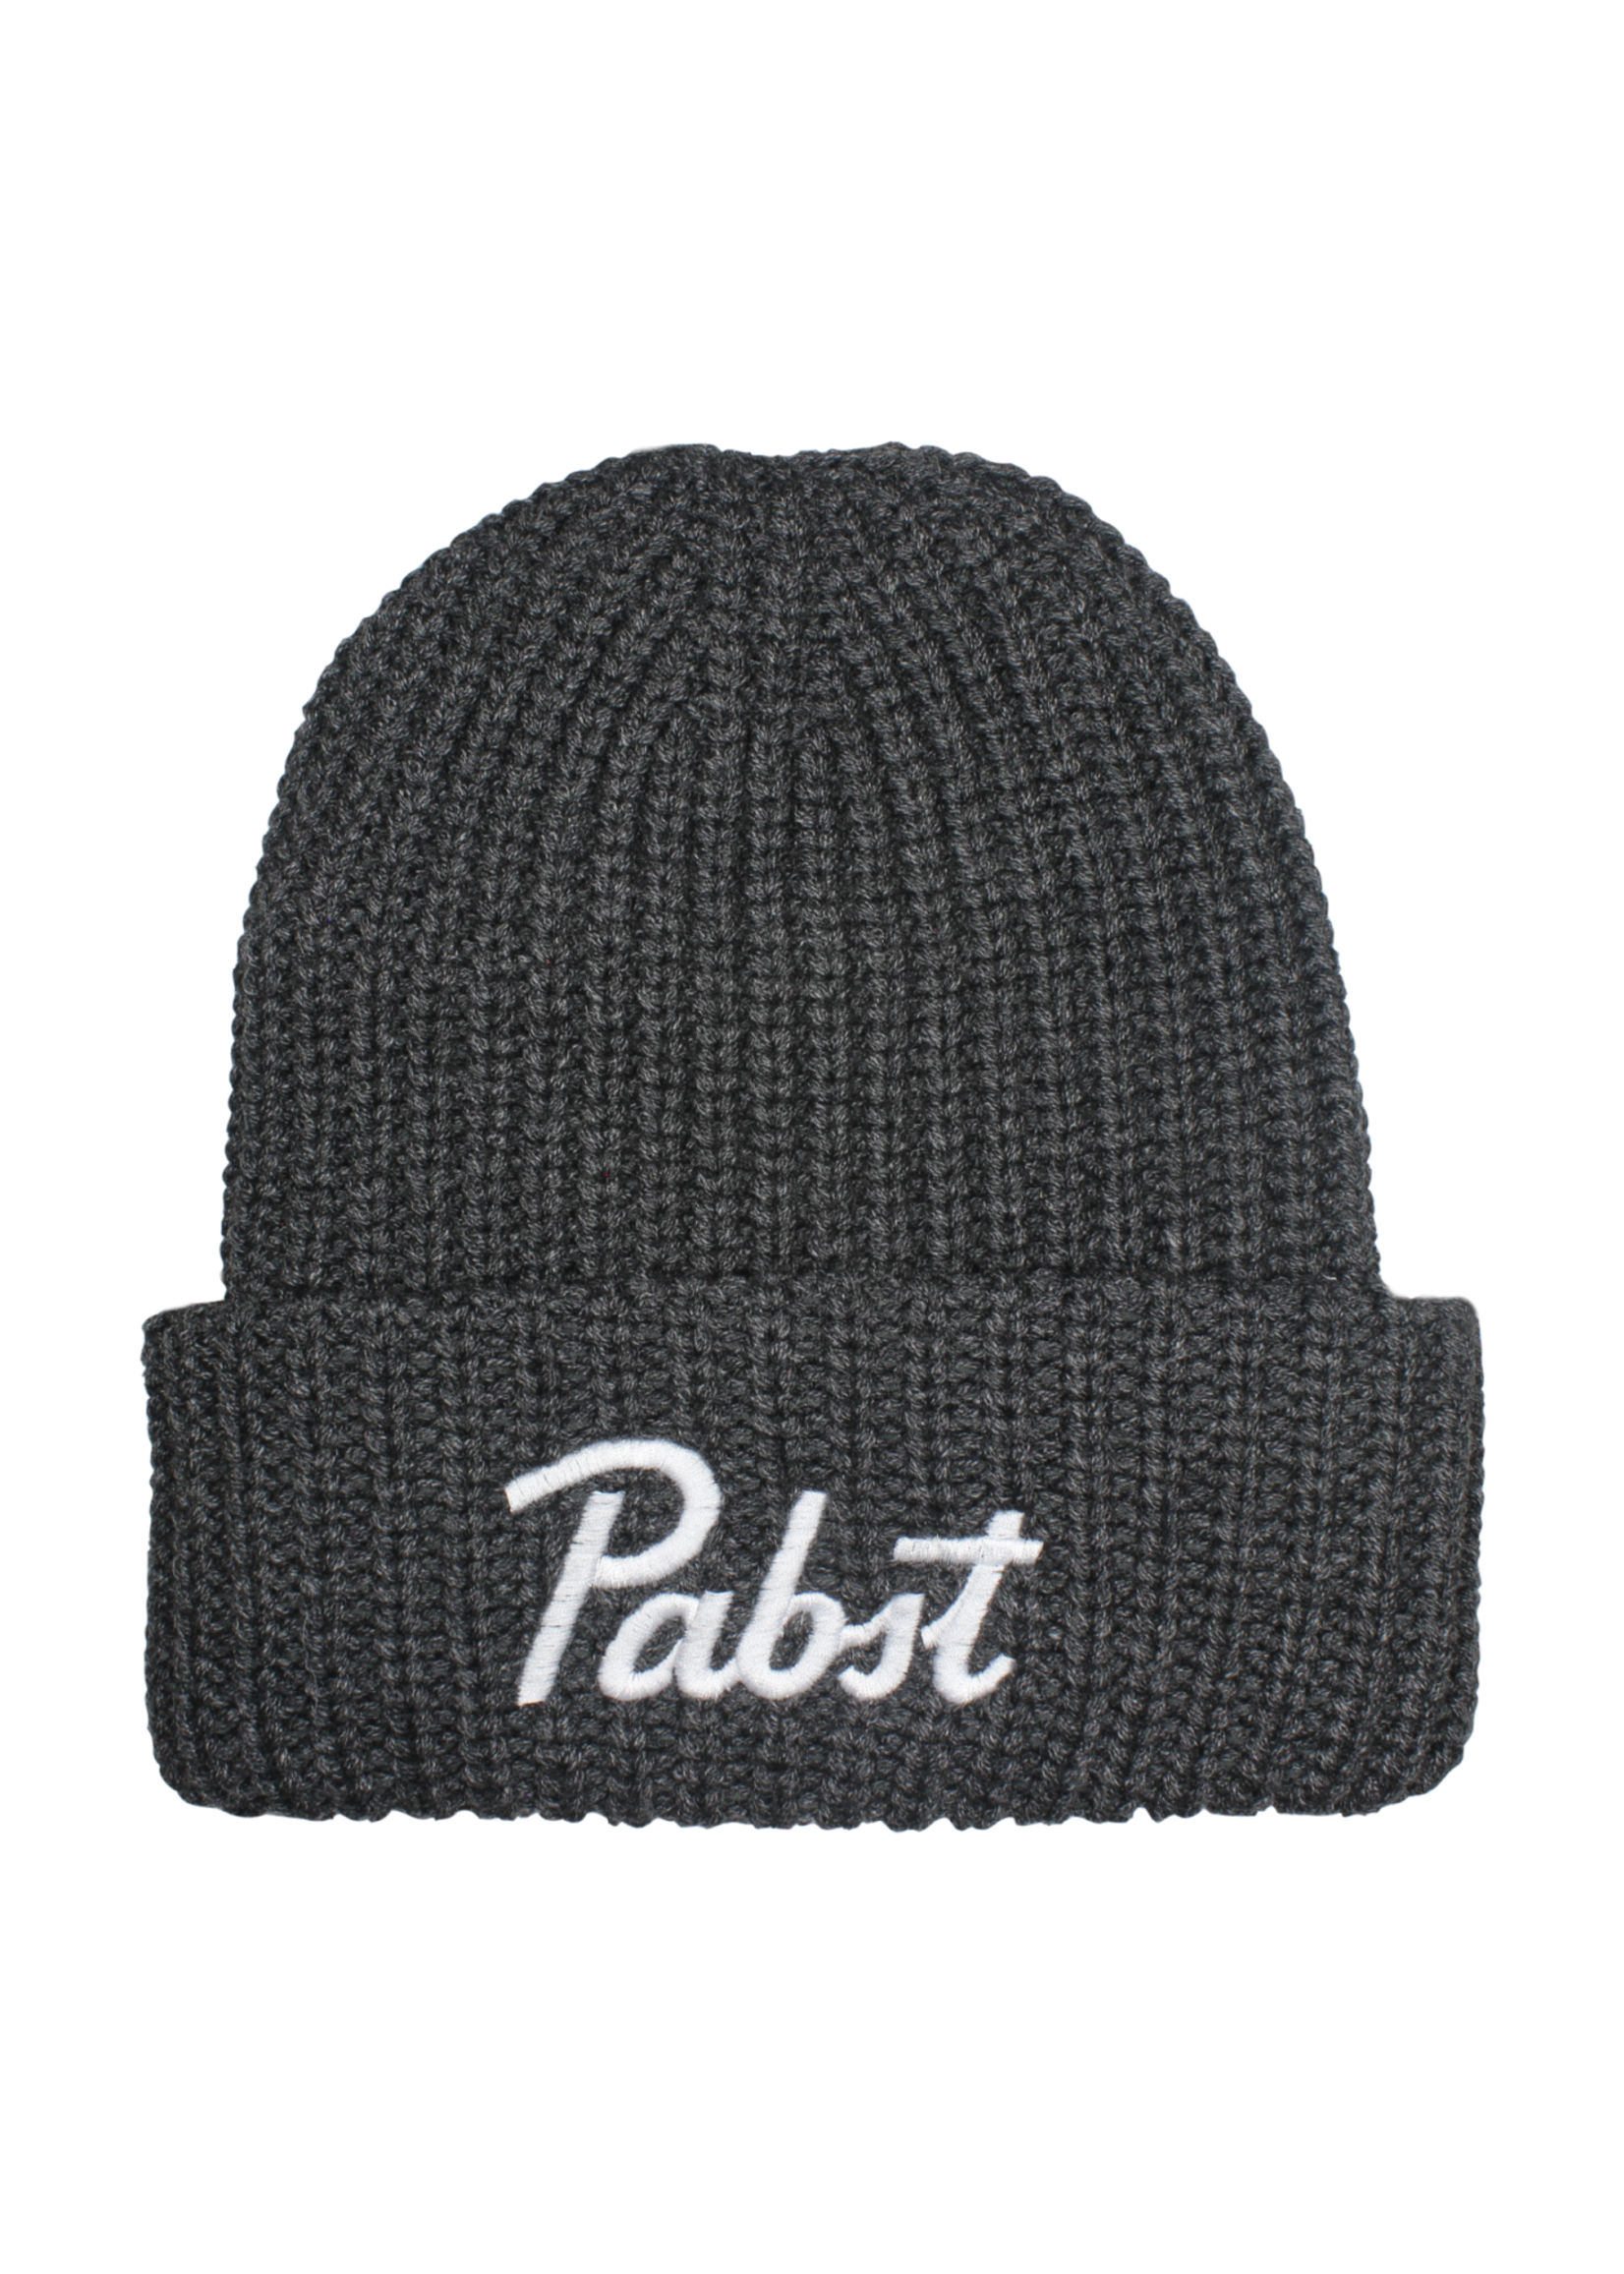 Pabst Pabst Script Charcoal Grey Chunky Knit Cuffed Beanie